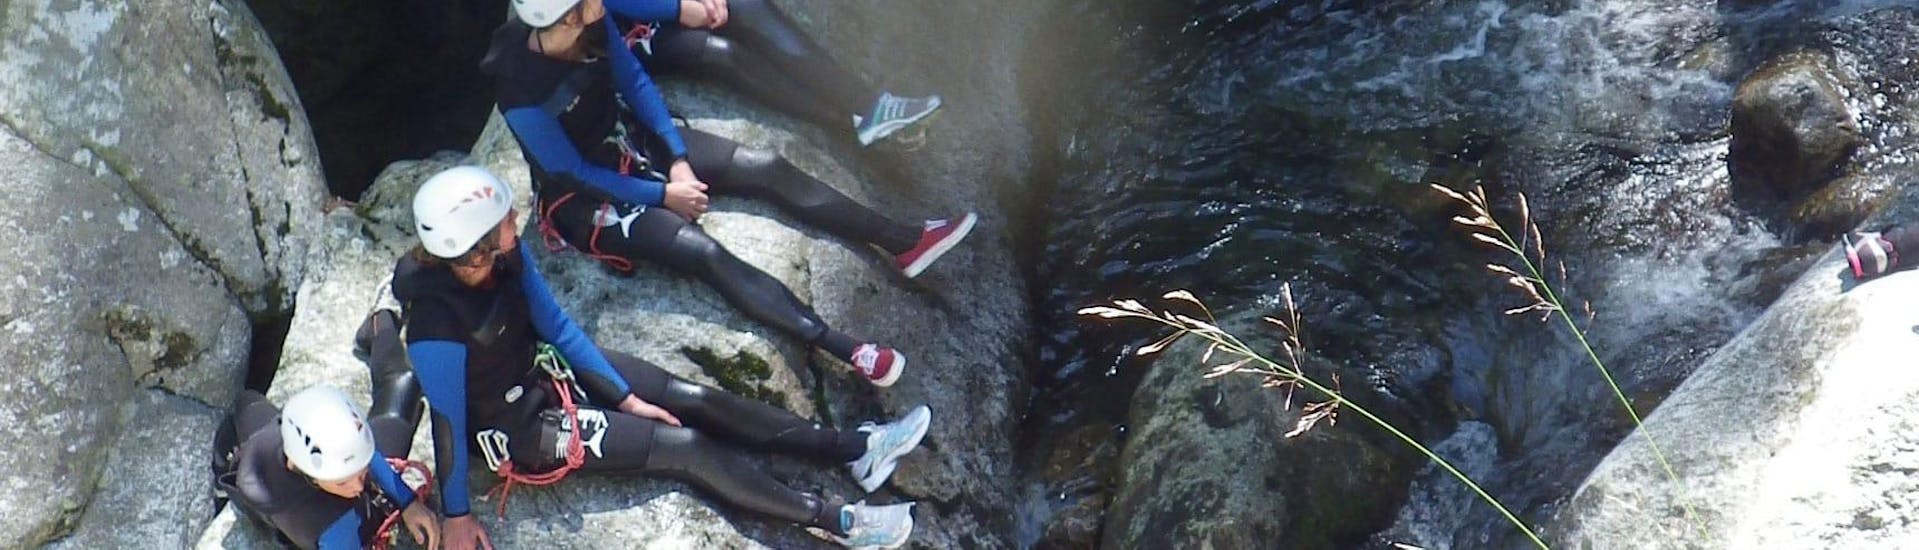 Gevorderde Canyoning in Rousses - Cévennes.